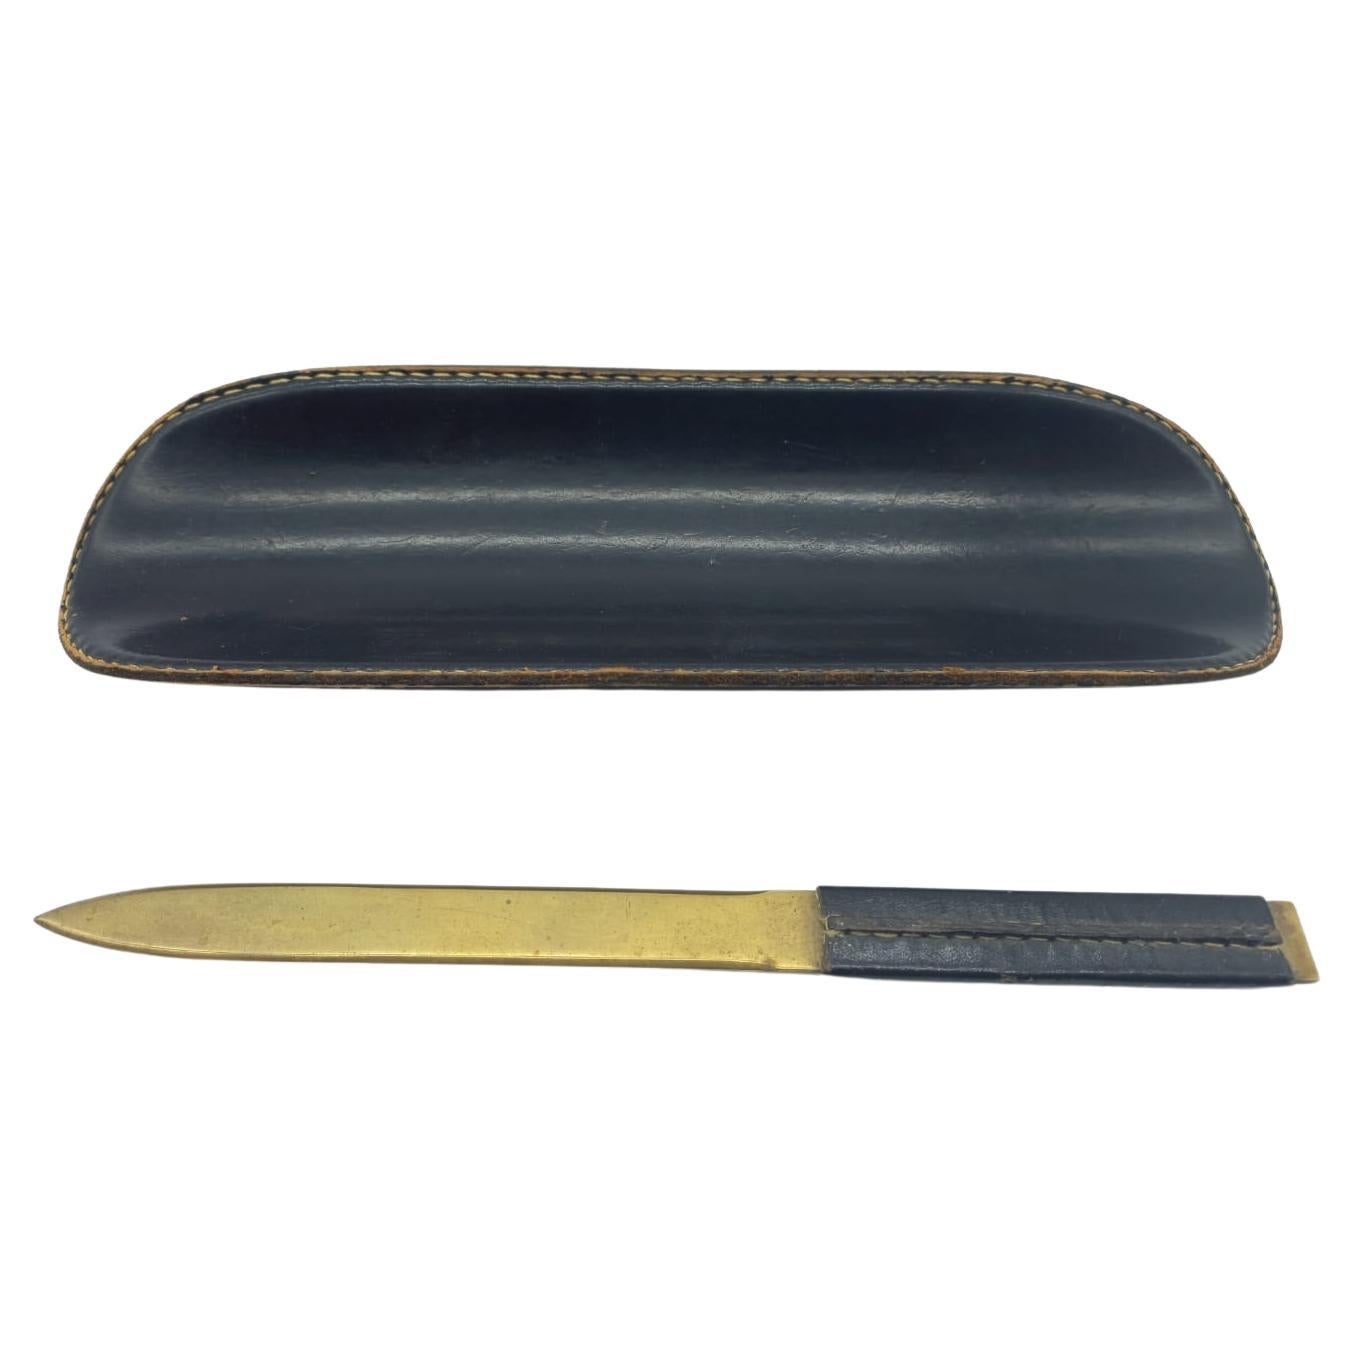 Carl Auböck brass letter opener with leather tray, 1950s, Vienna Austria, good original condition